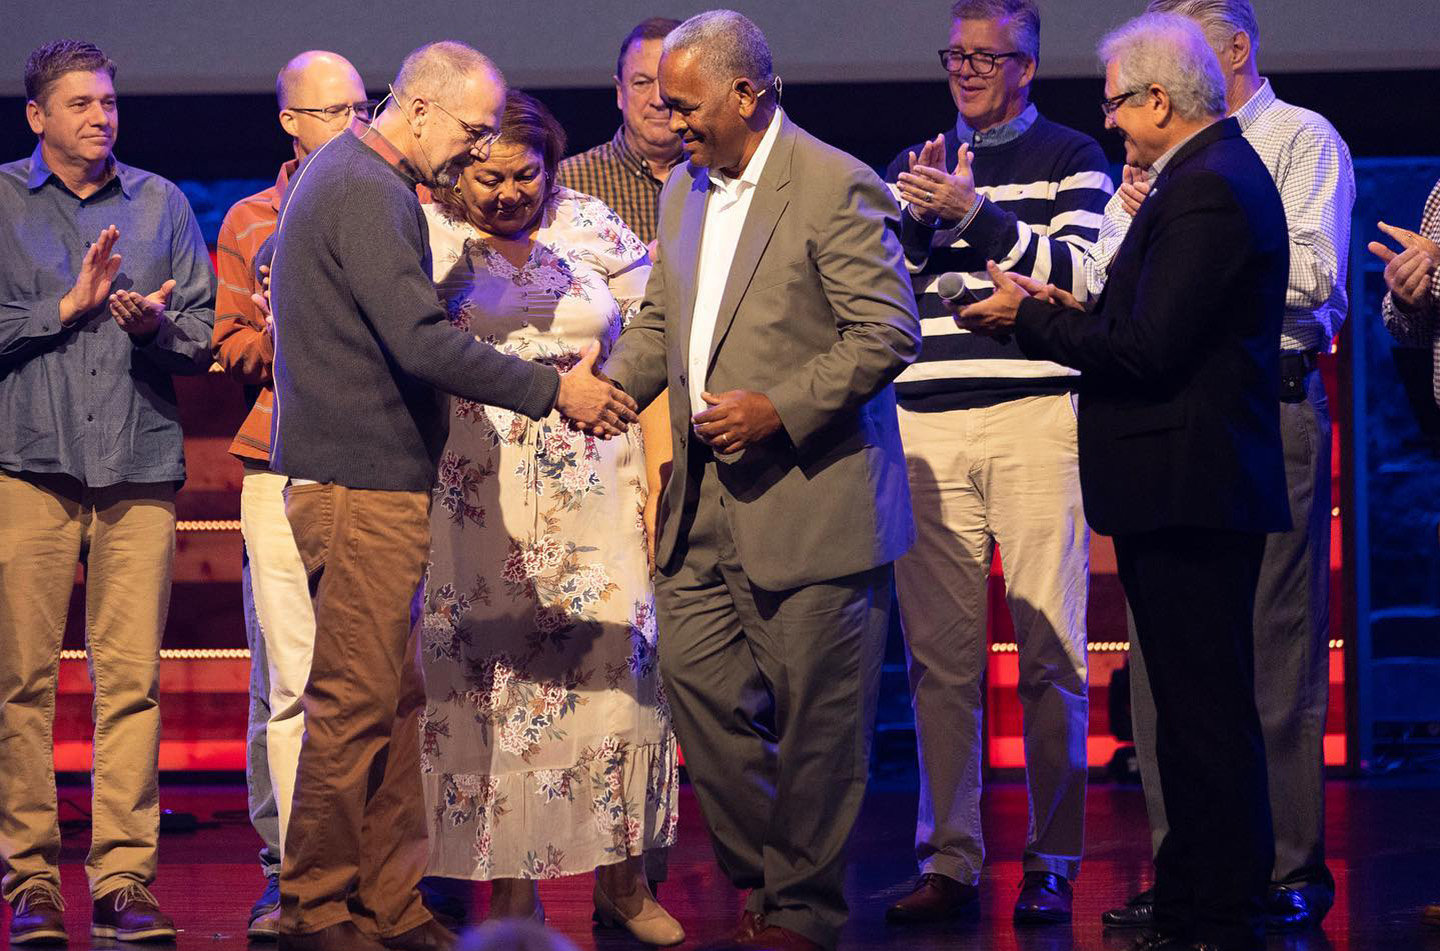 Lead pastor of Eastside, Dr. John Hull, officially welcomes Yuris Blanco Diaz, pastor of Eastside Espanol, and his congregation to the Eastside family during a joining worship service earlier this month. (Photo/Eastside Baptist Church)